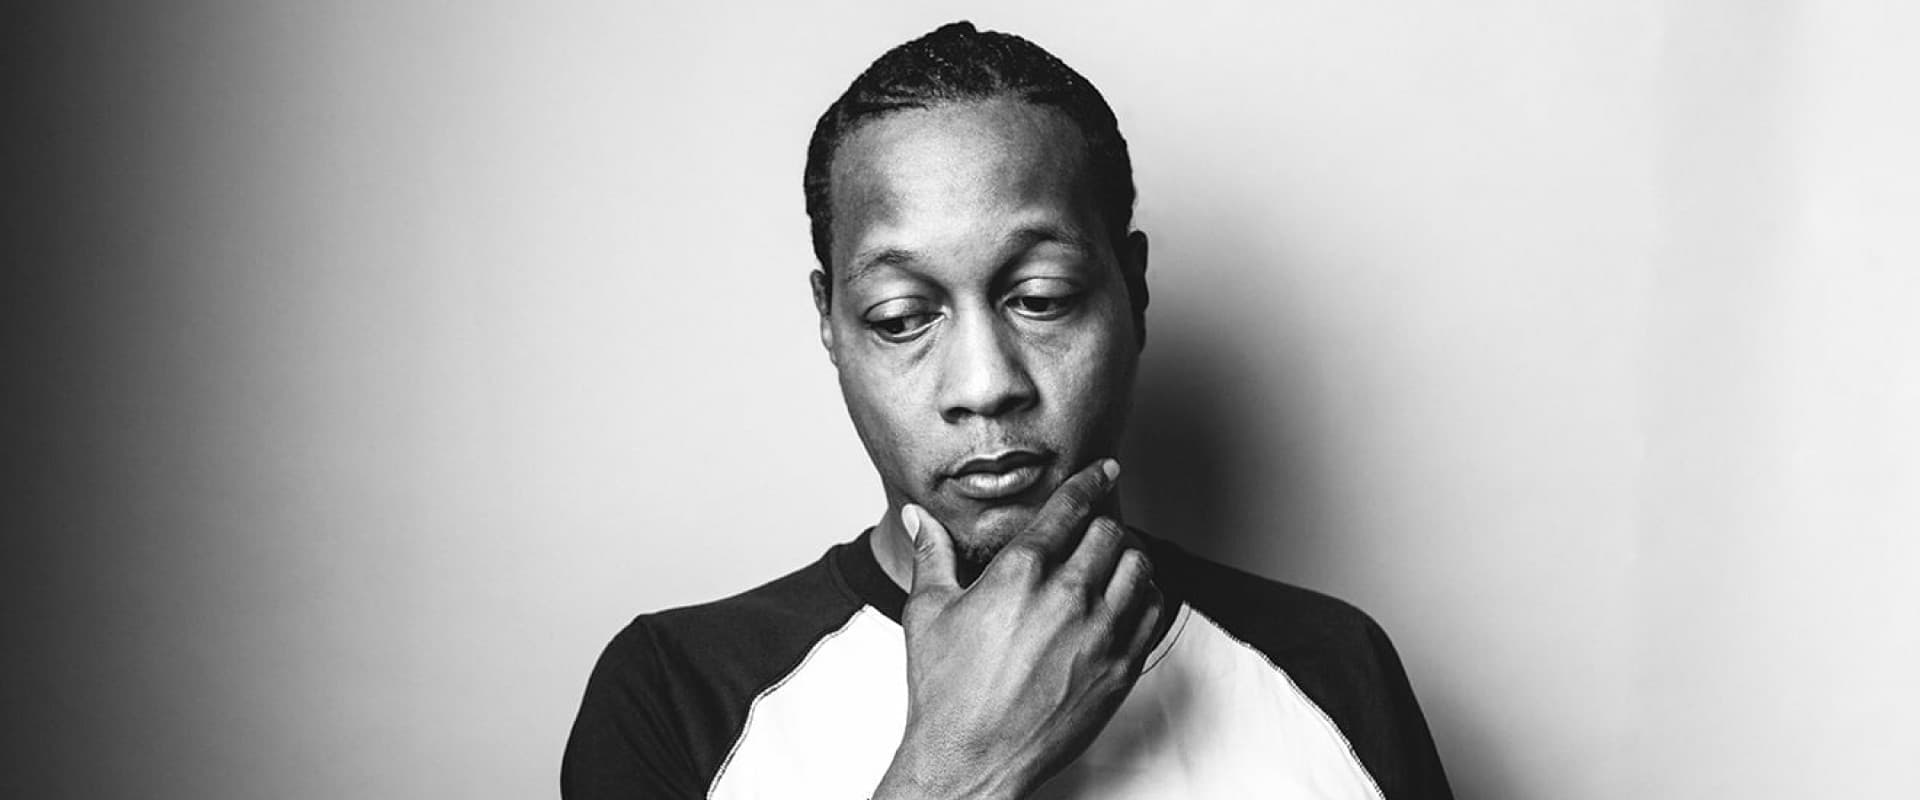 DJ Quik Visualism - The Art of Sound Into Vision